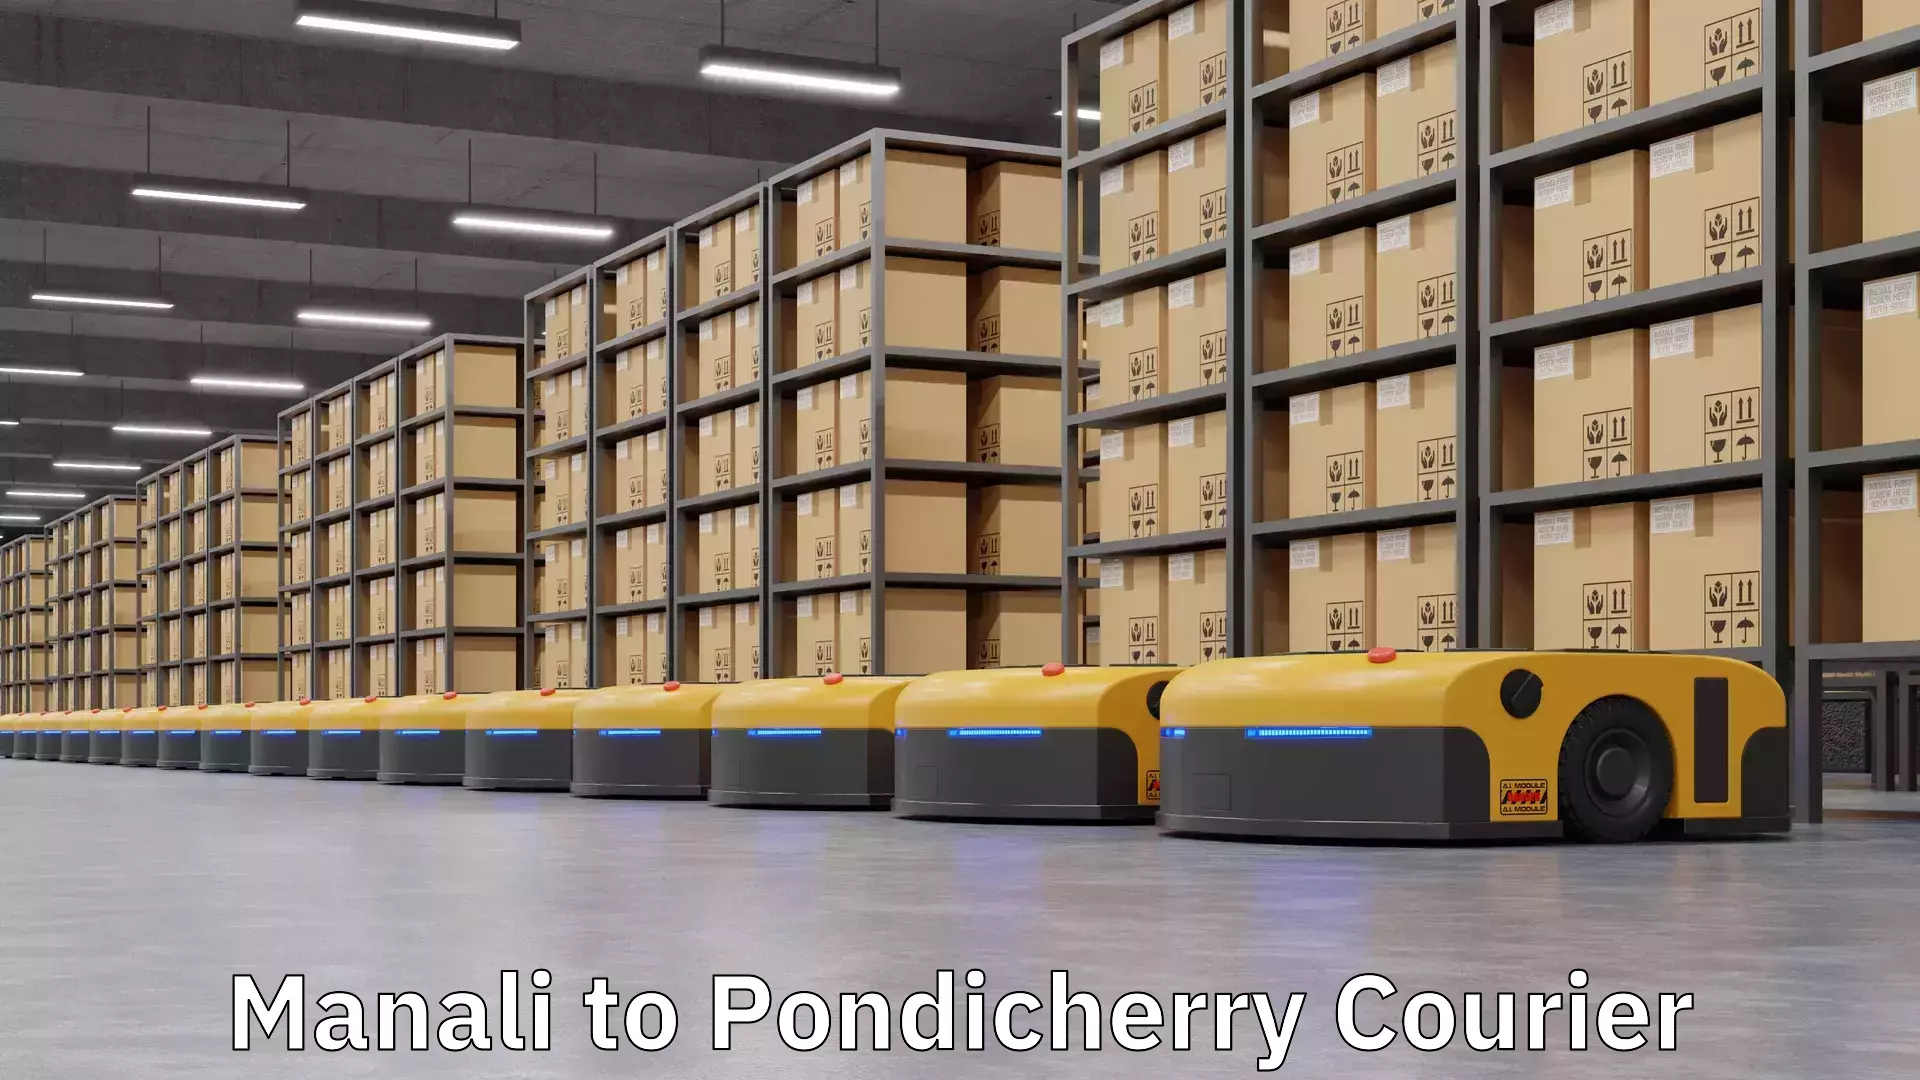 Fast delivery service Manali to Pondicherry